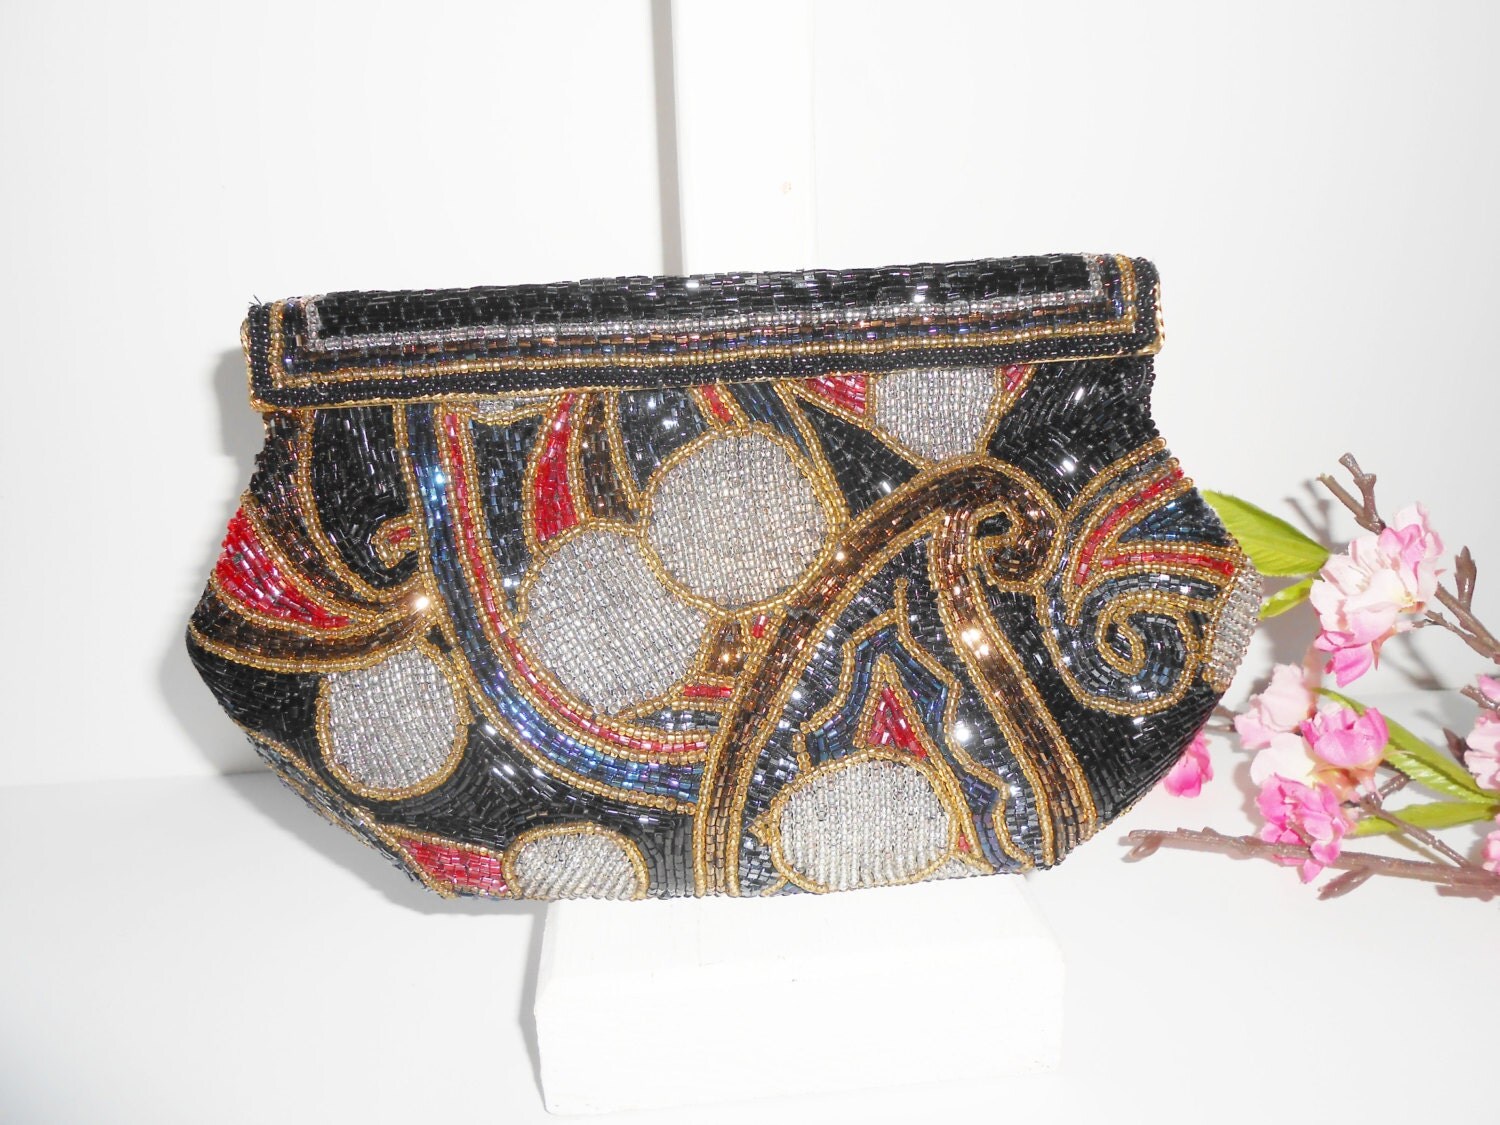 Beaded Evening Bag Vintage Black and Color Beaded Clutch